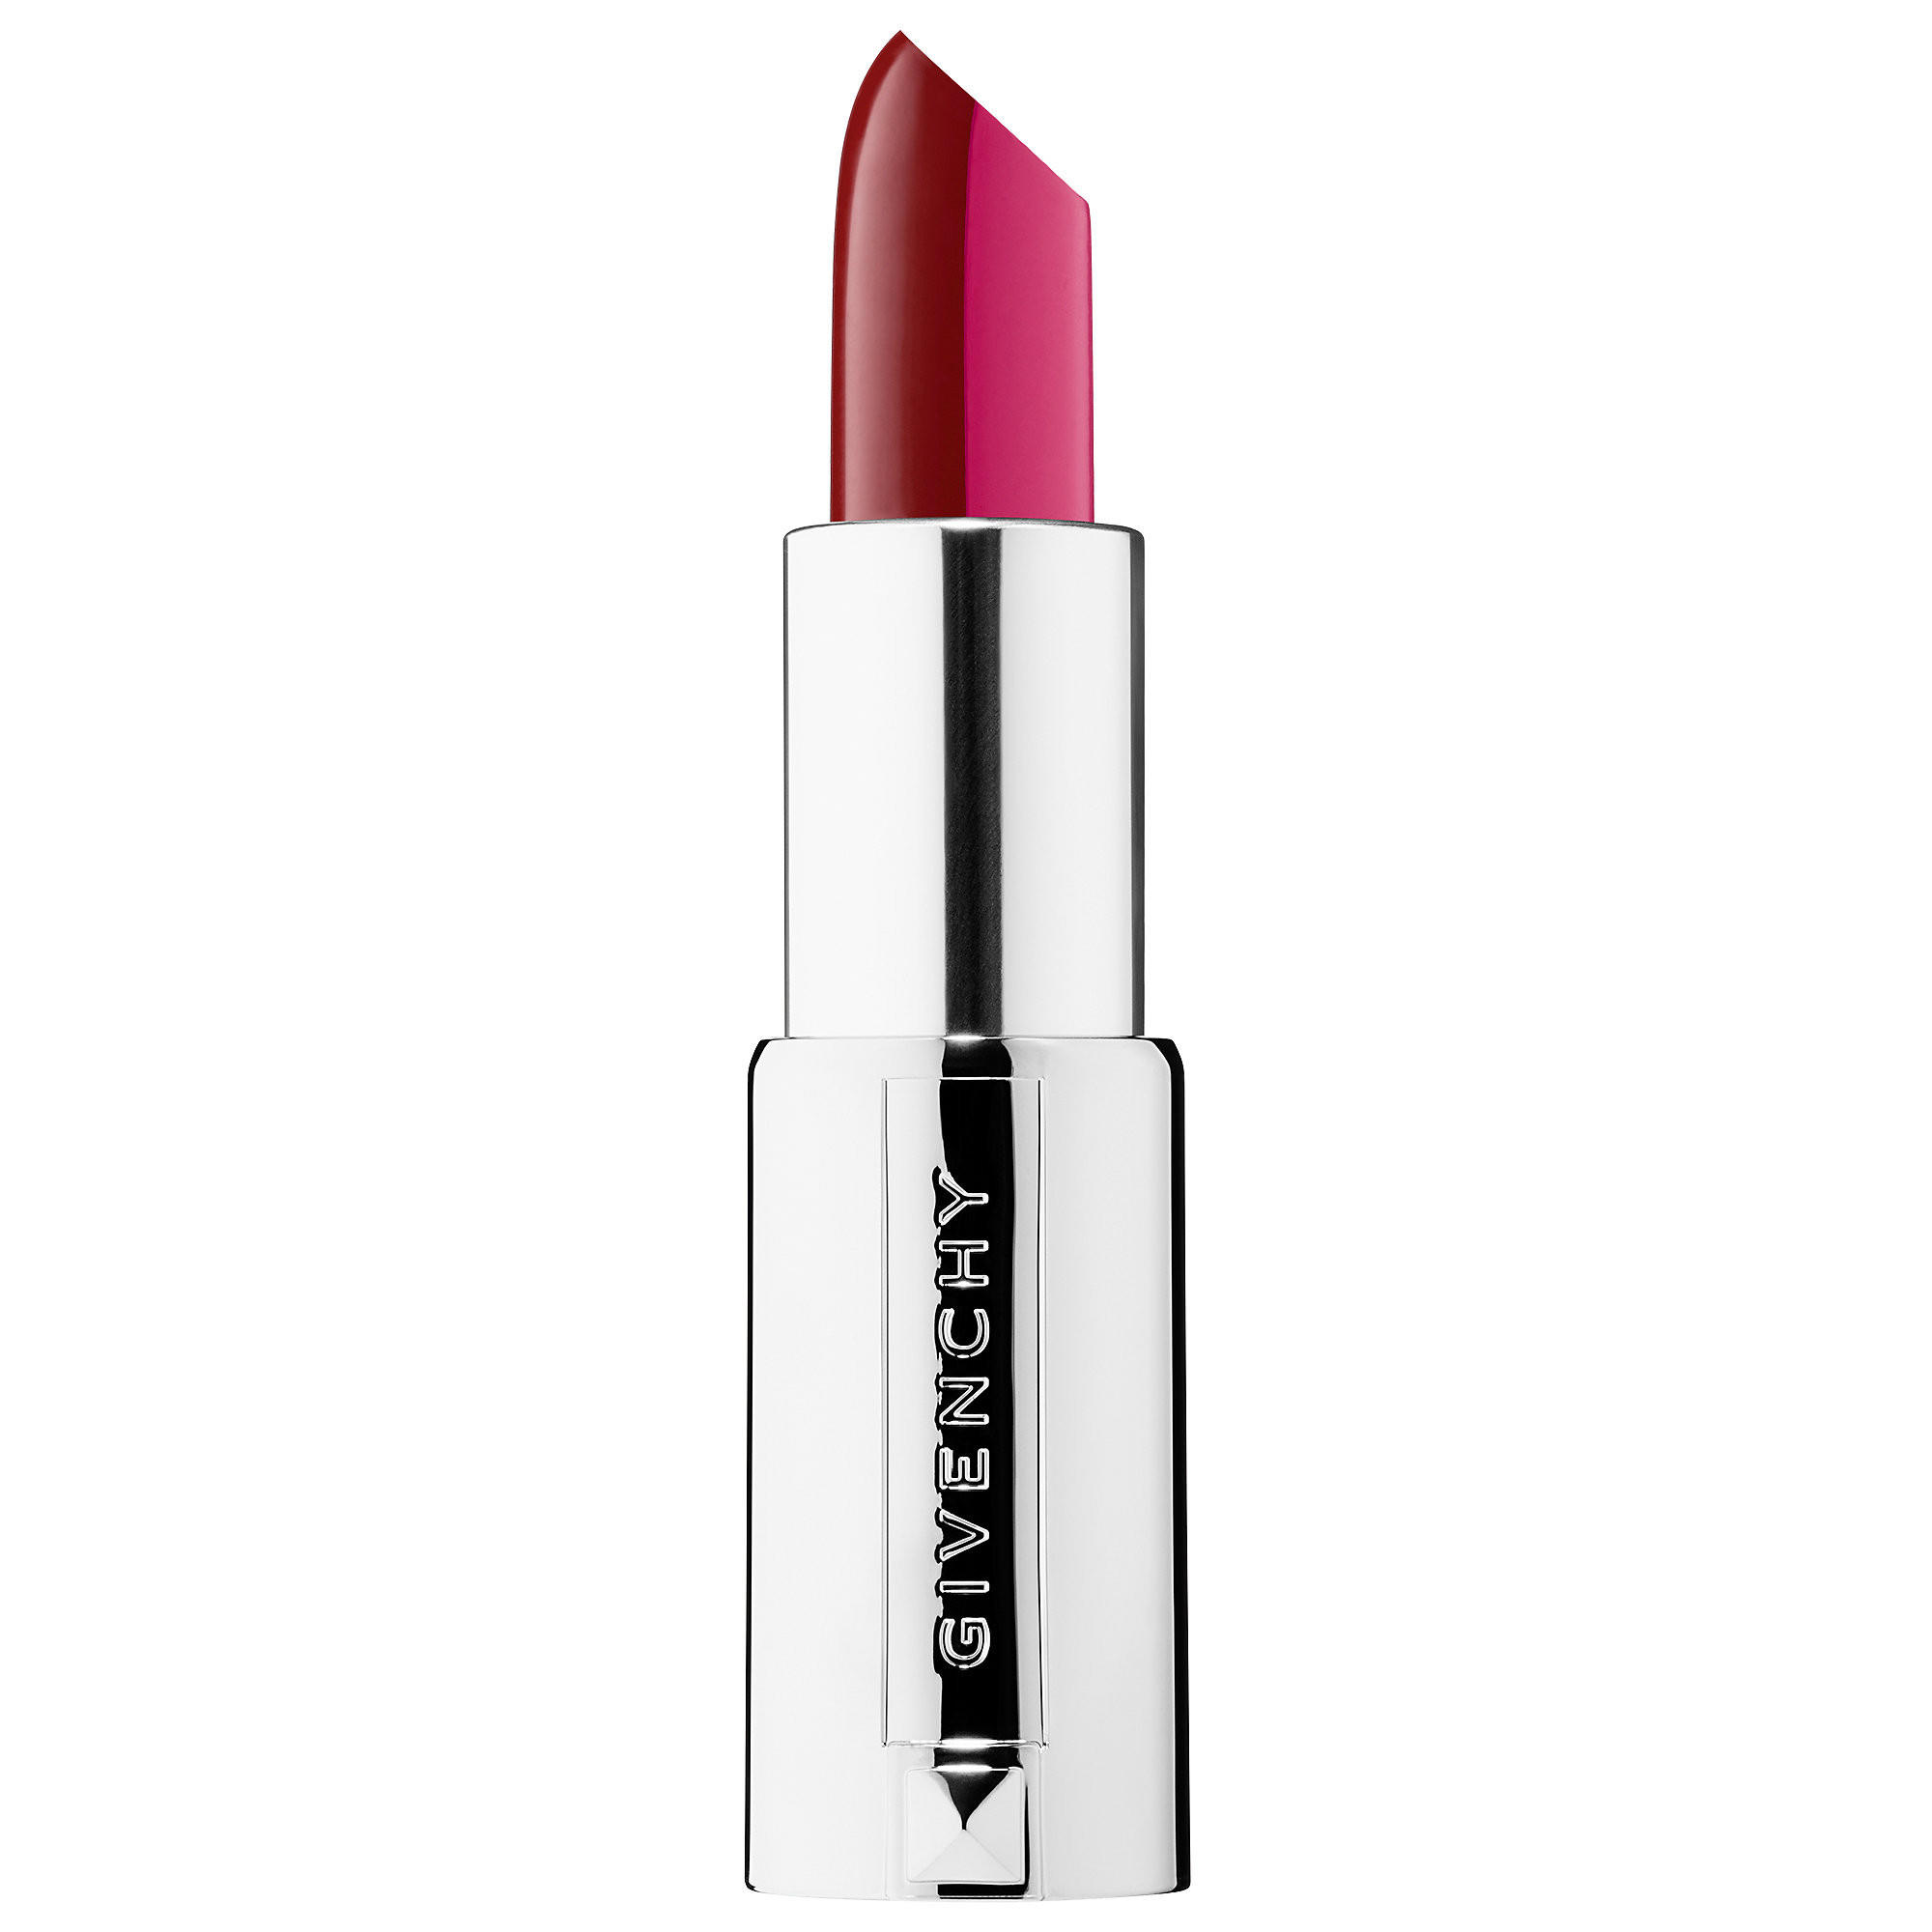 givenchy two tone lipstick